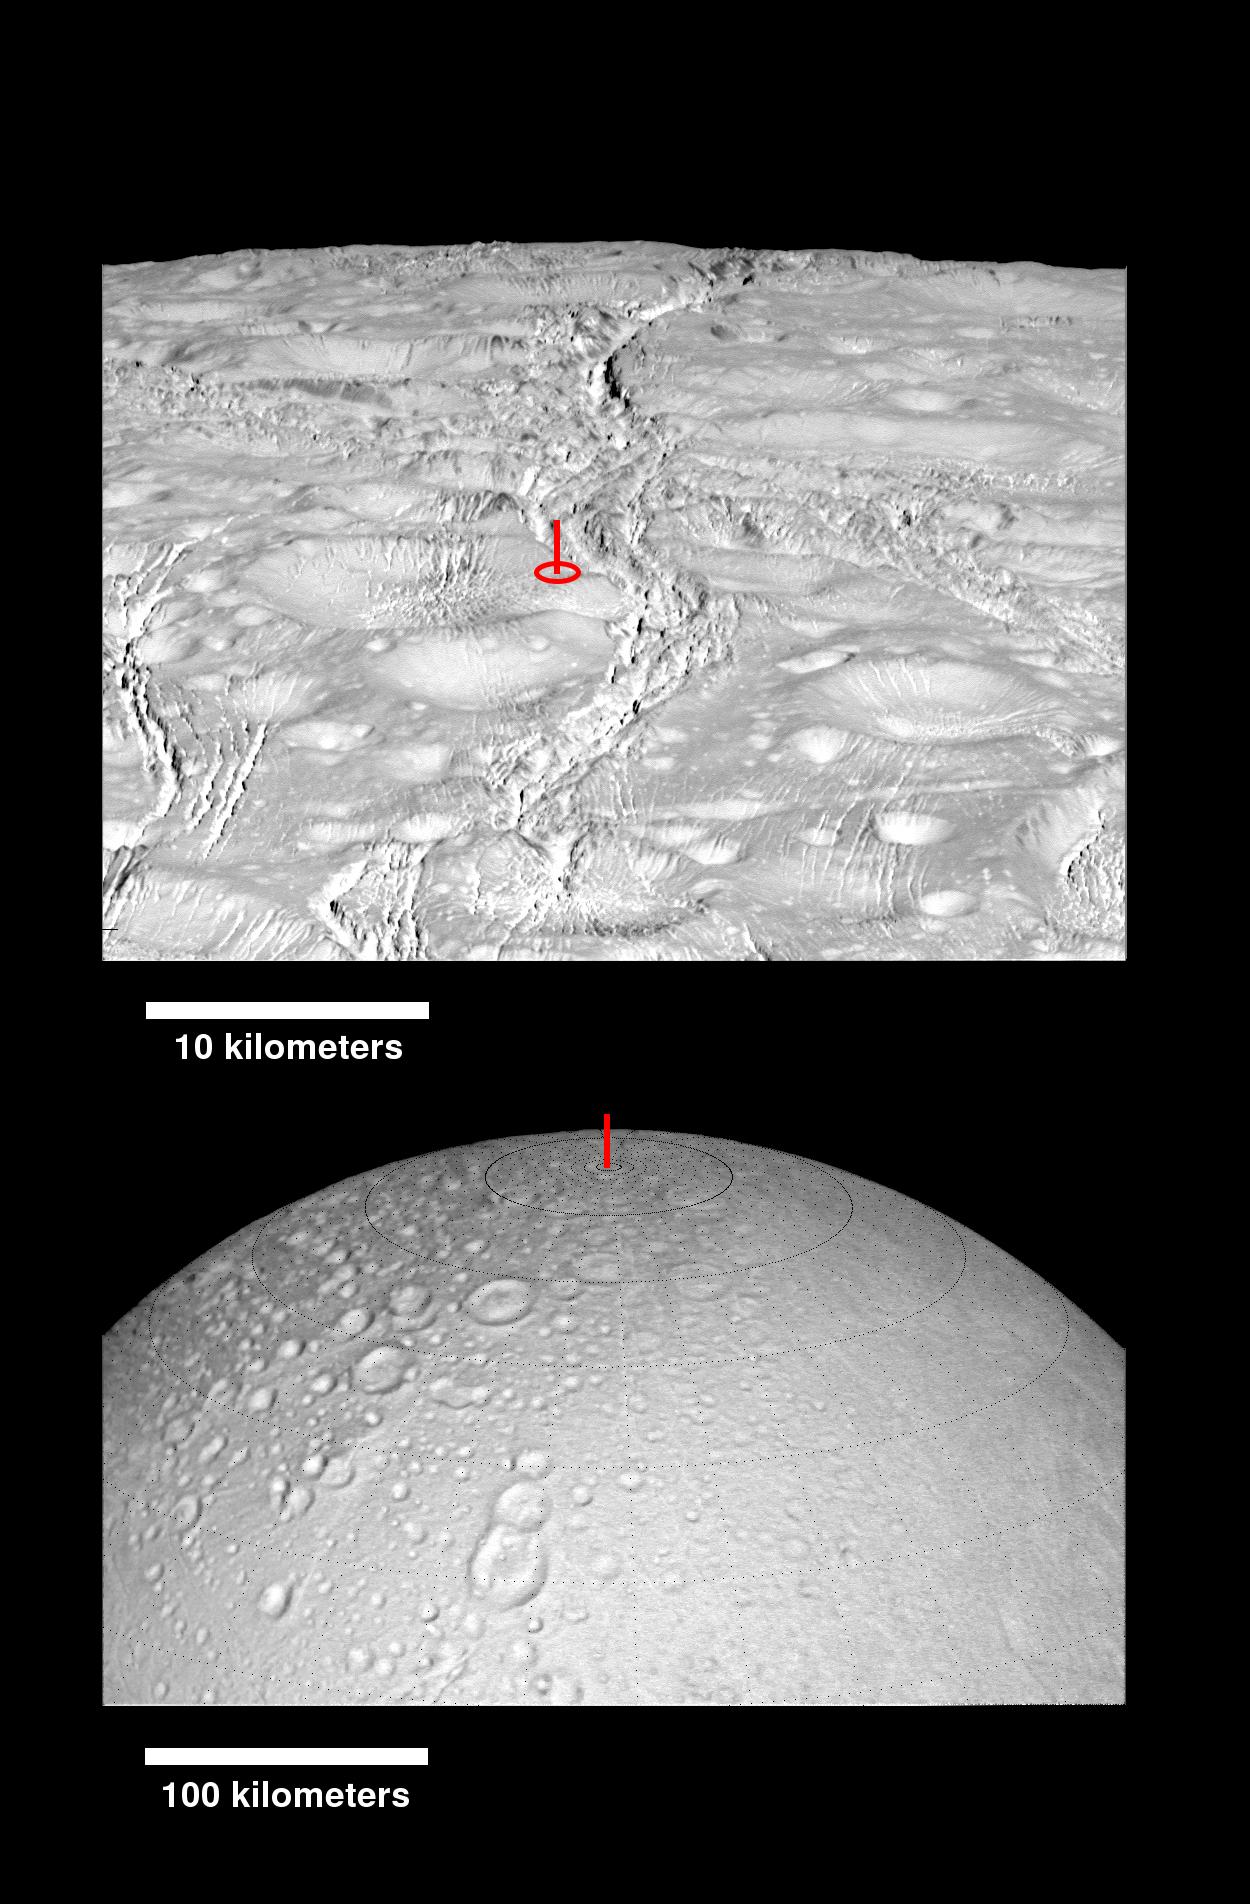 This montage of images shows the precise location of the north pole on Saturn's icy moon Enceladus. 